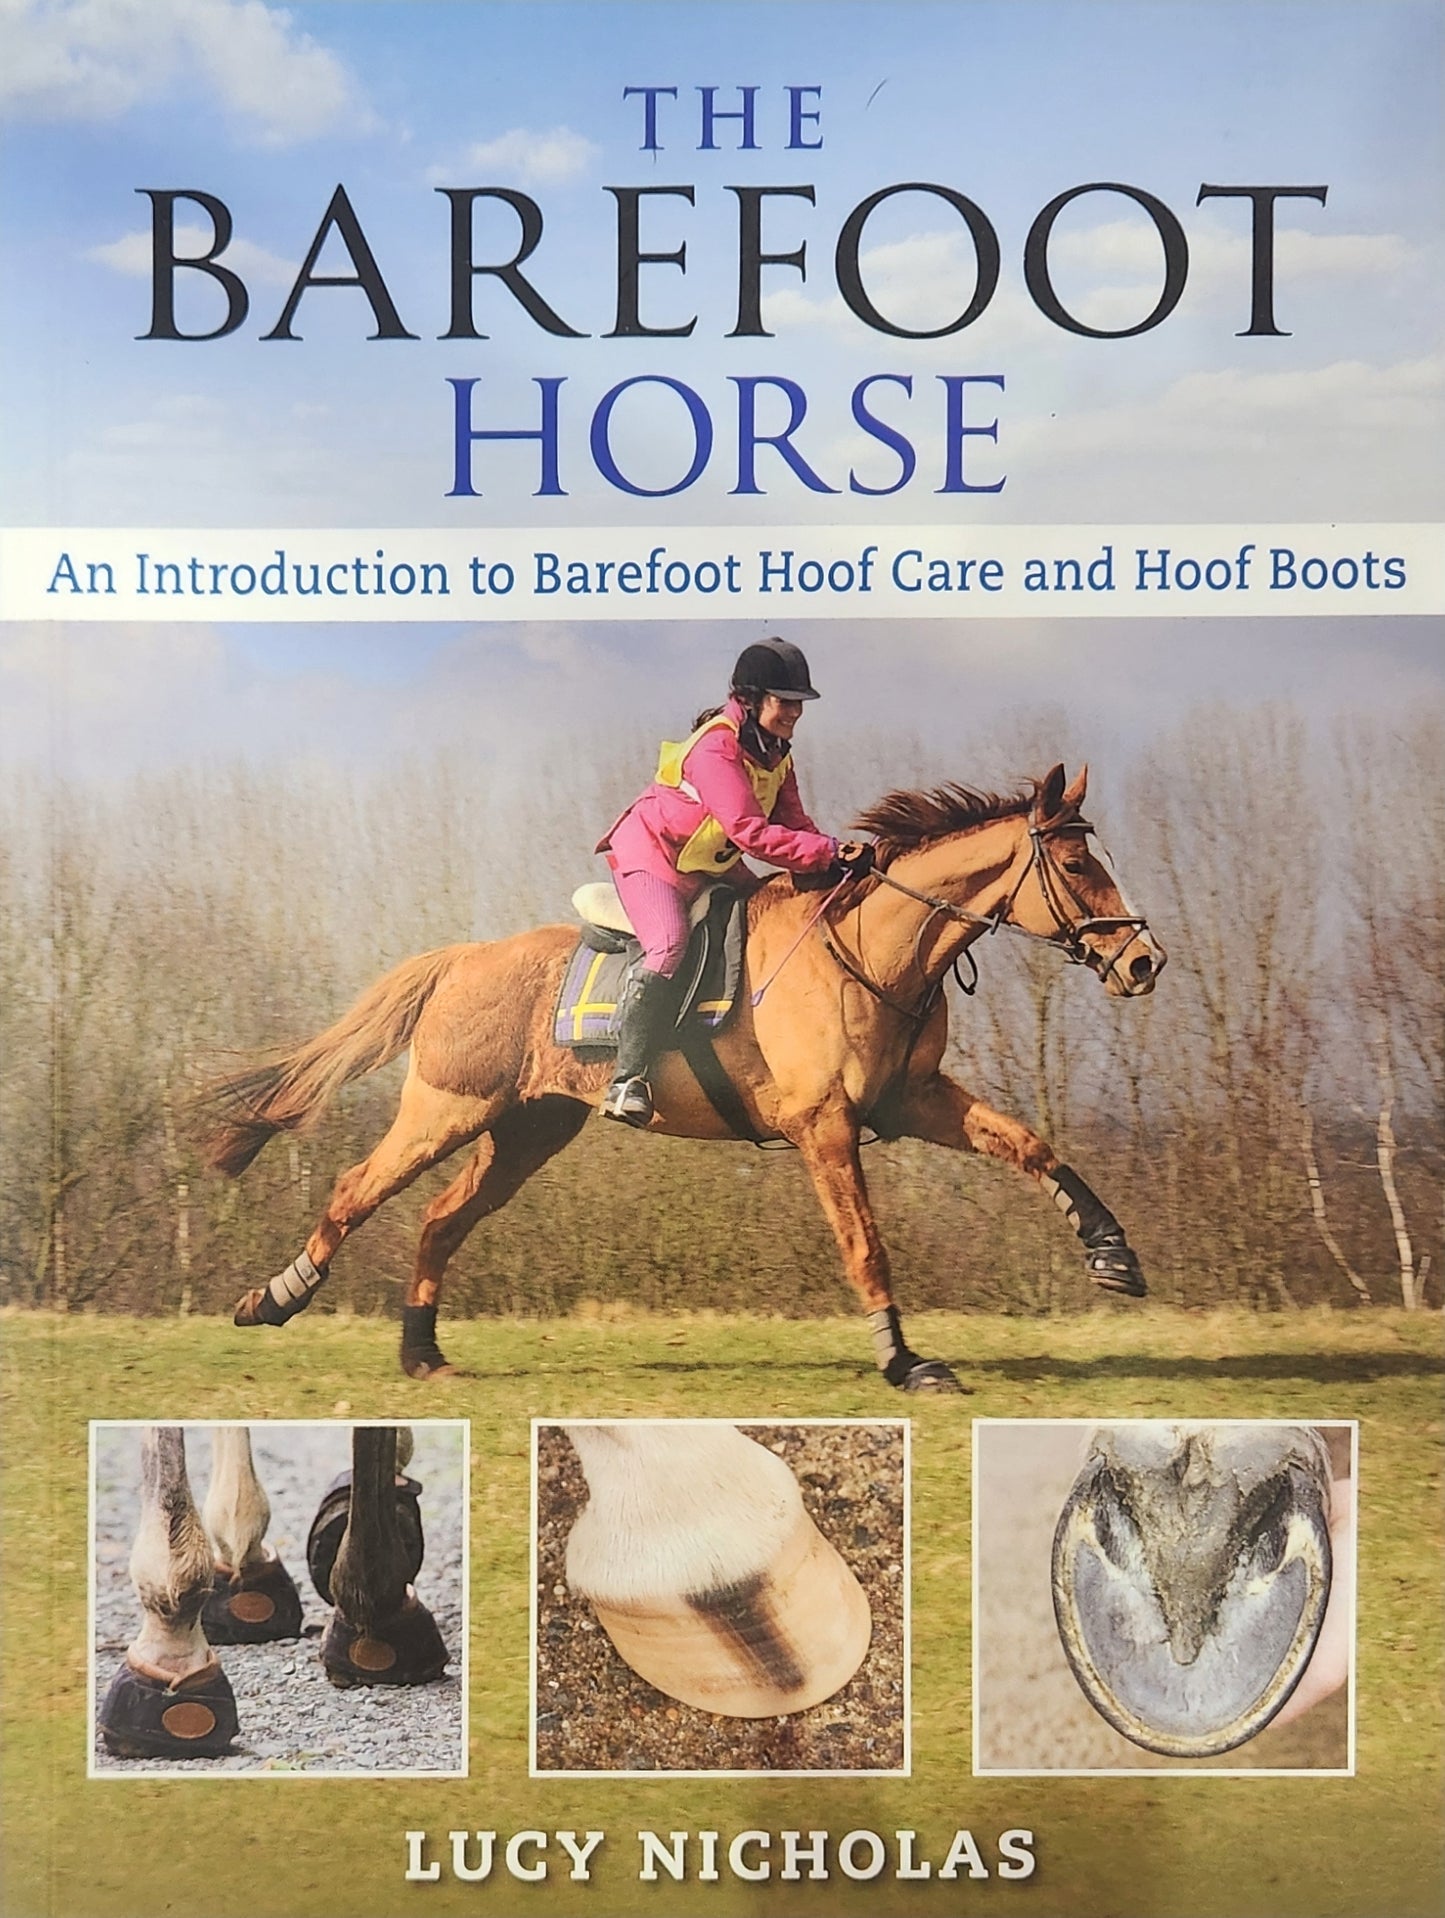 The Barefoot Horse